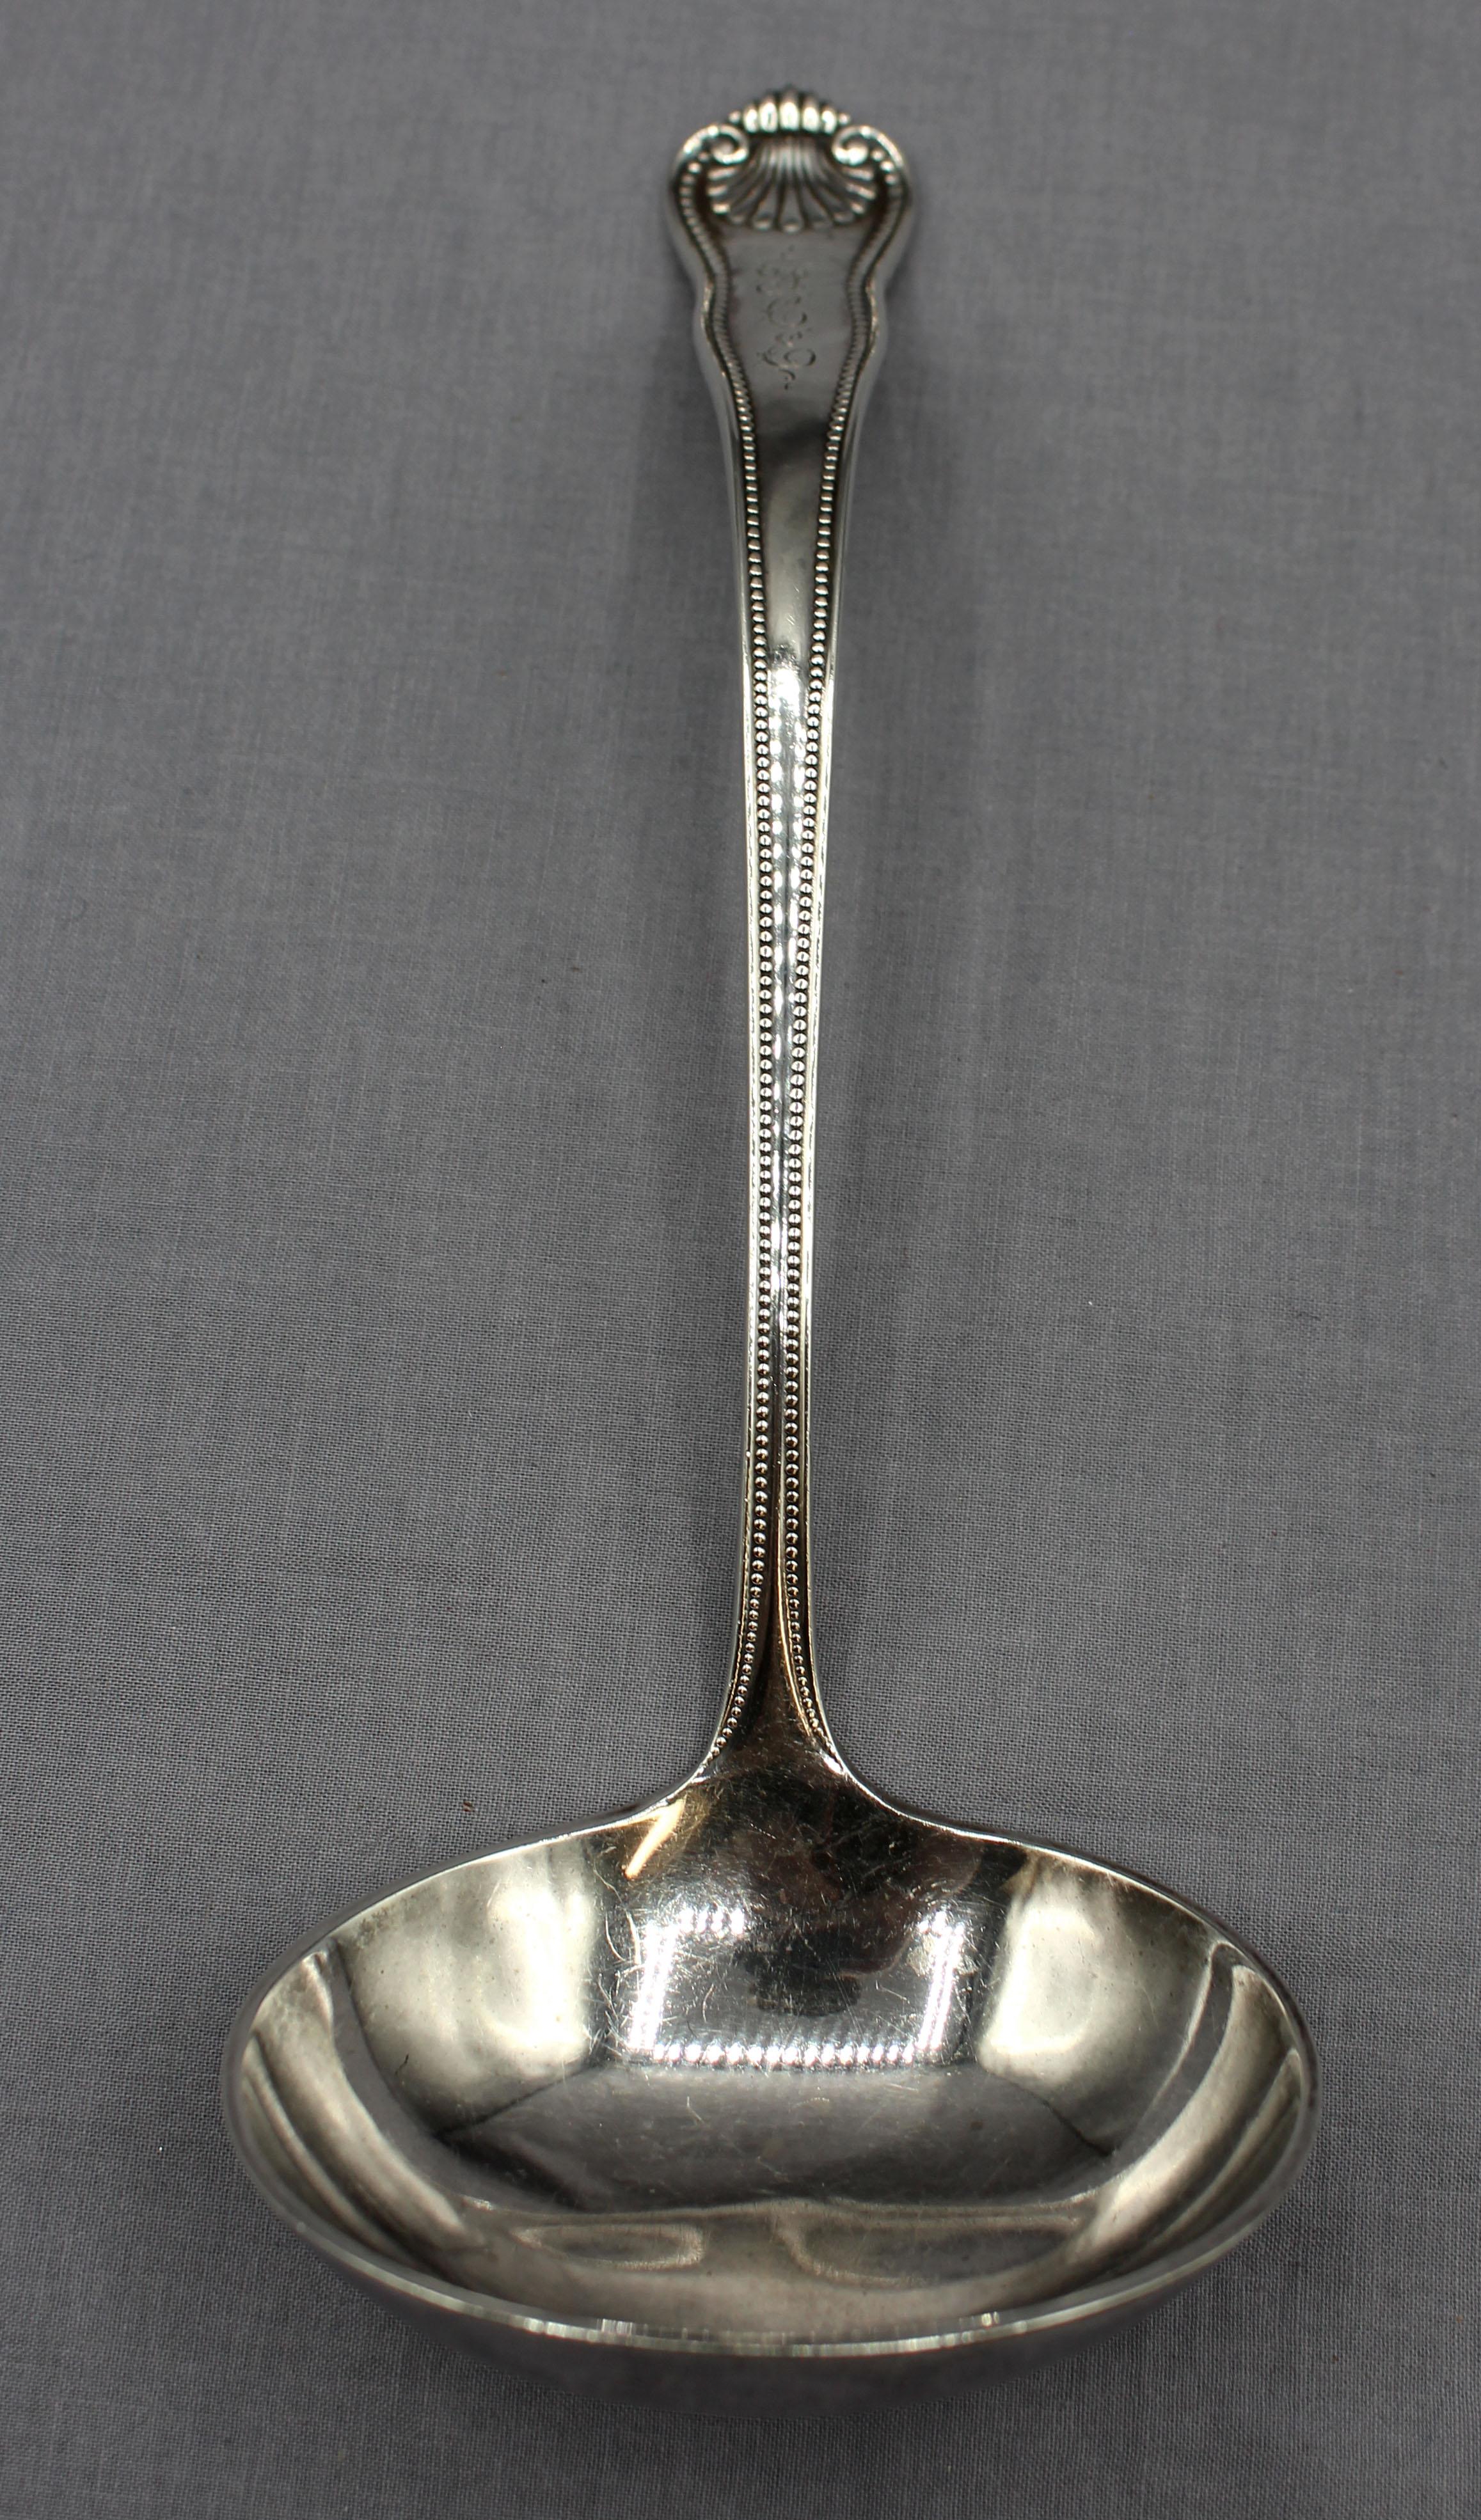 Sterling silver soup ladle by Frank Smith in 1910. A fine 